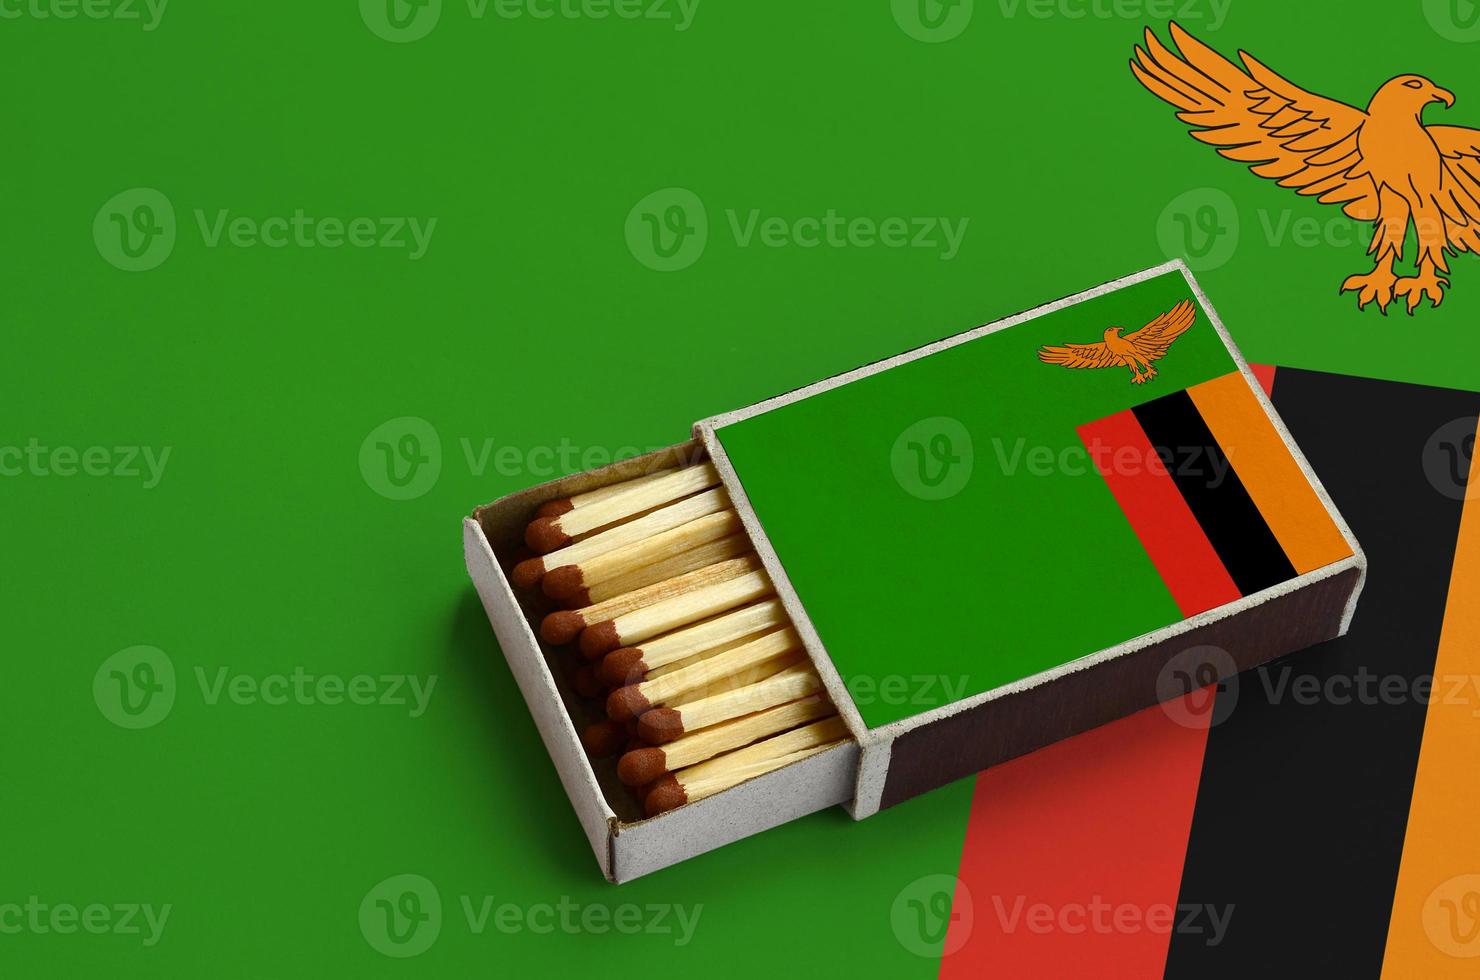 Zambia flag is shown in an open matchbox, which is filled with matches and lies on a large flag photo